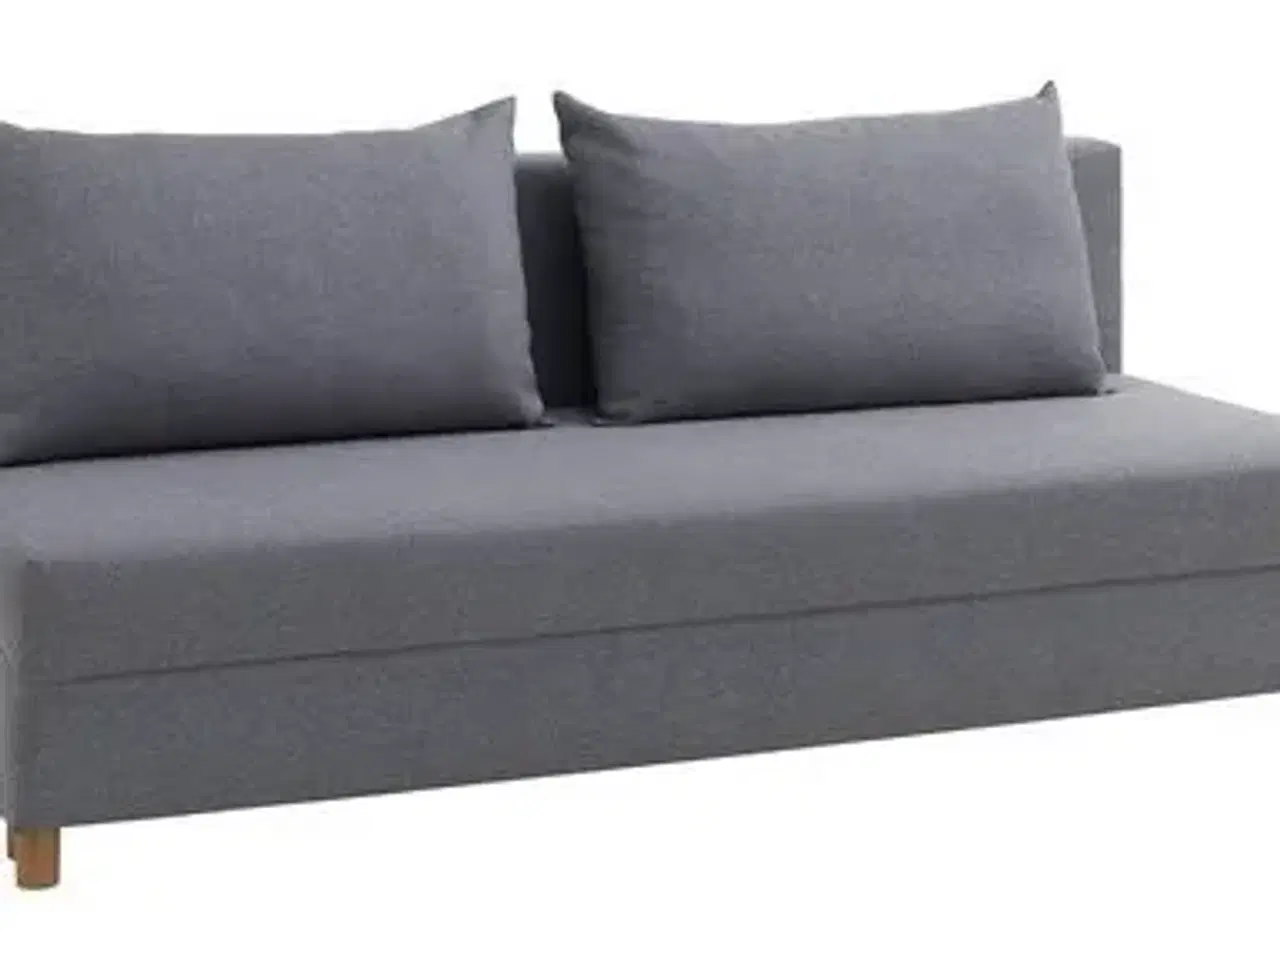 Billede 1 - Grey sofa / Daybed with storage and cushions